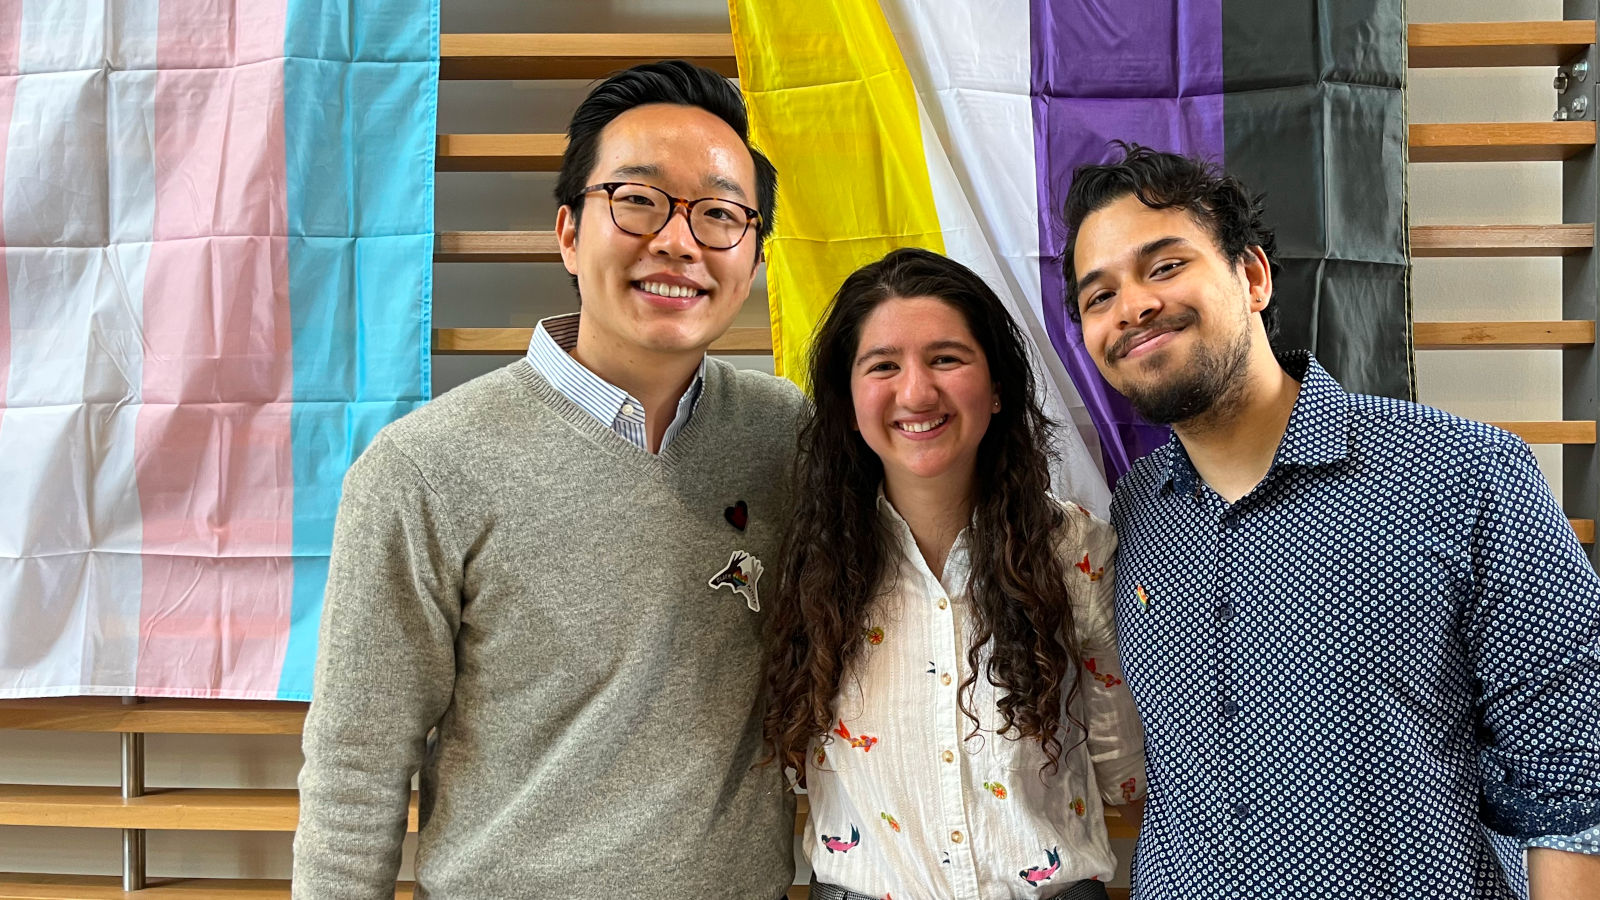 QueerMed leaders Jeremy Goh, Emma Monti and David Vaz